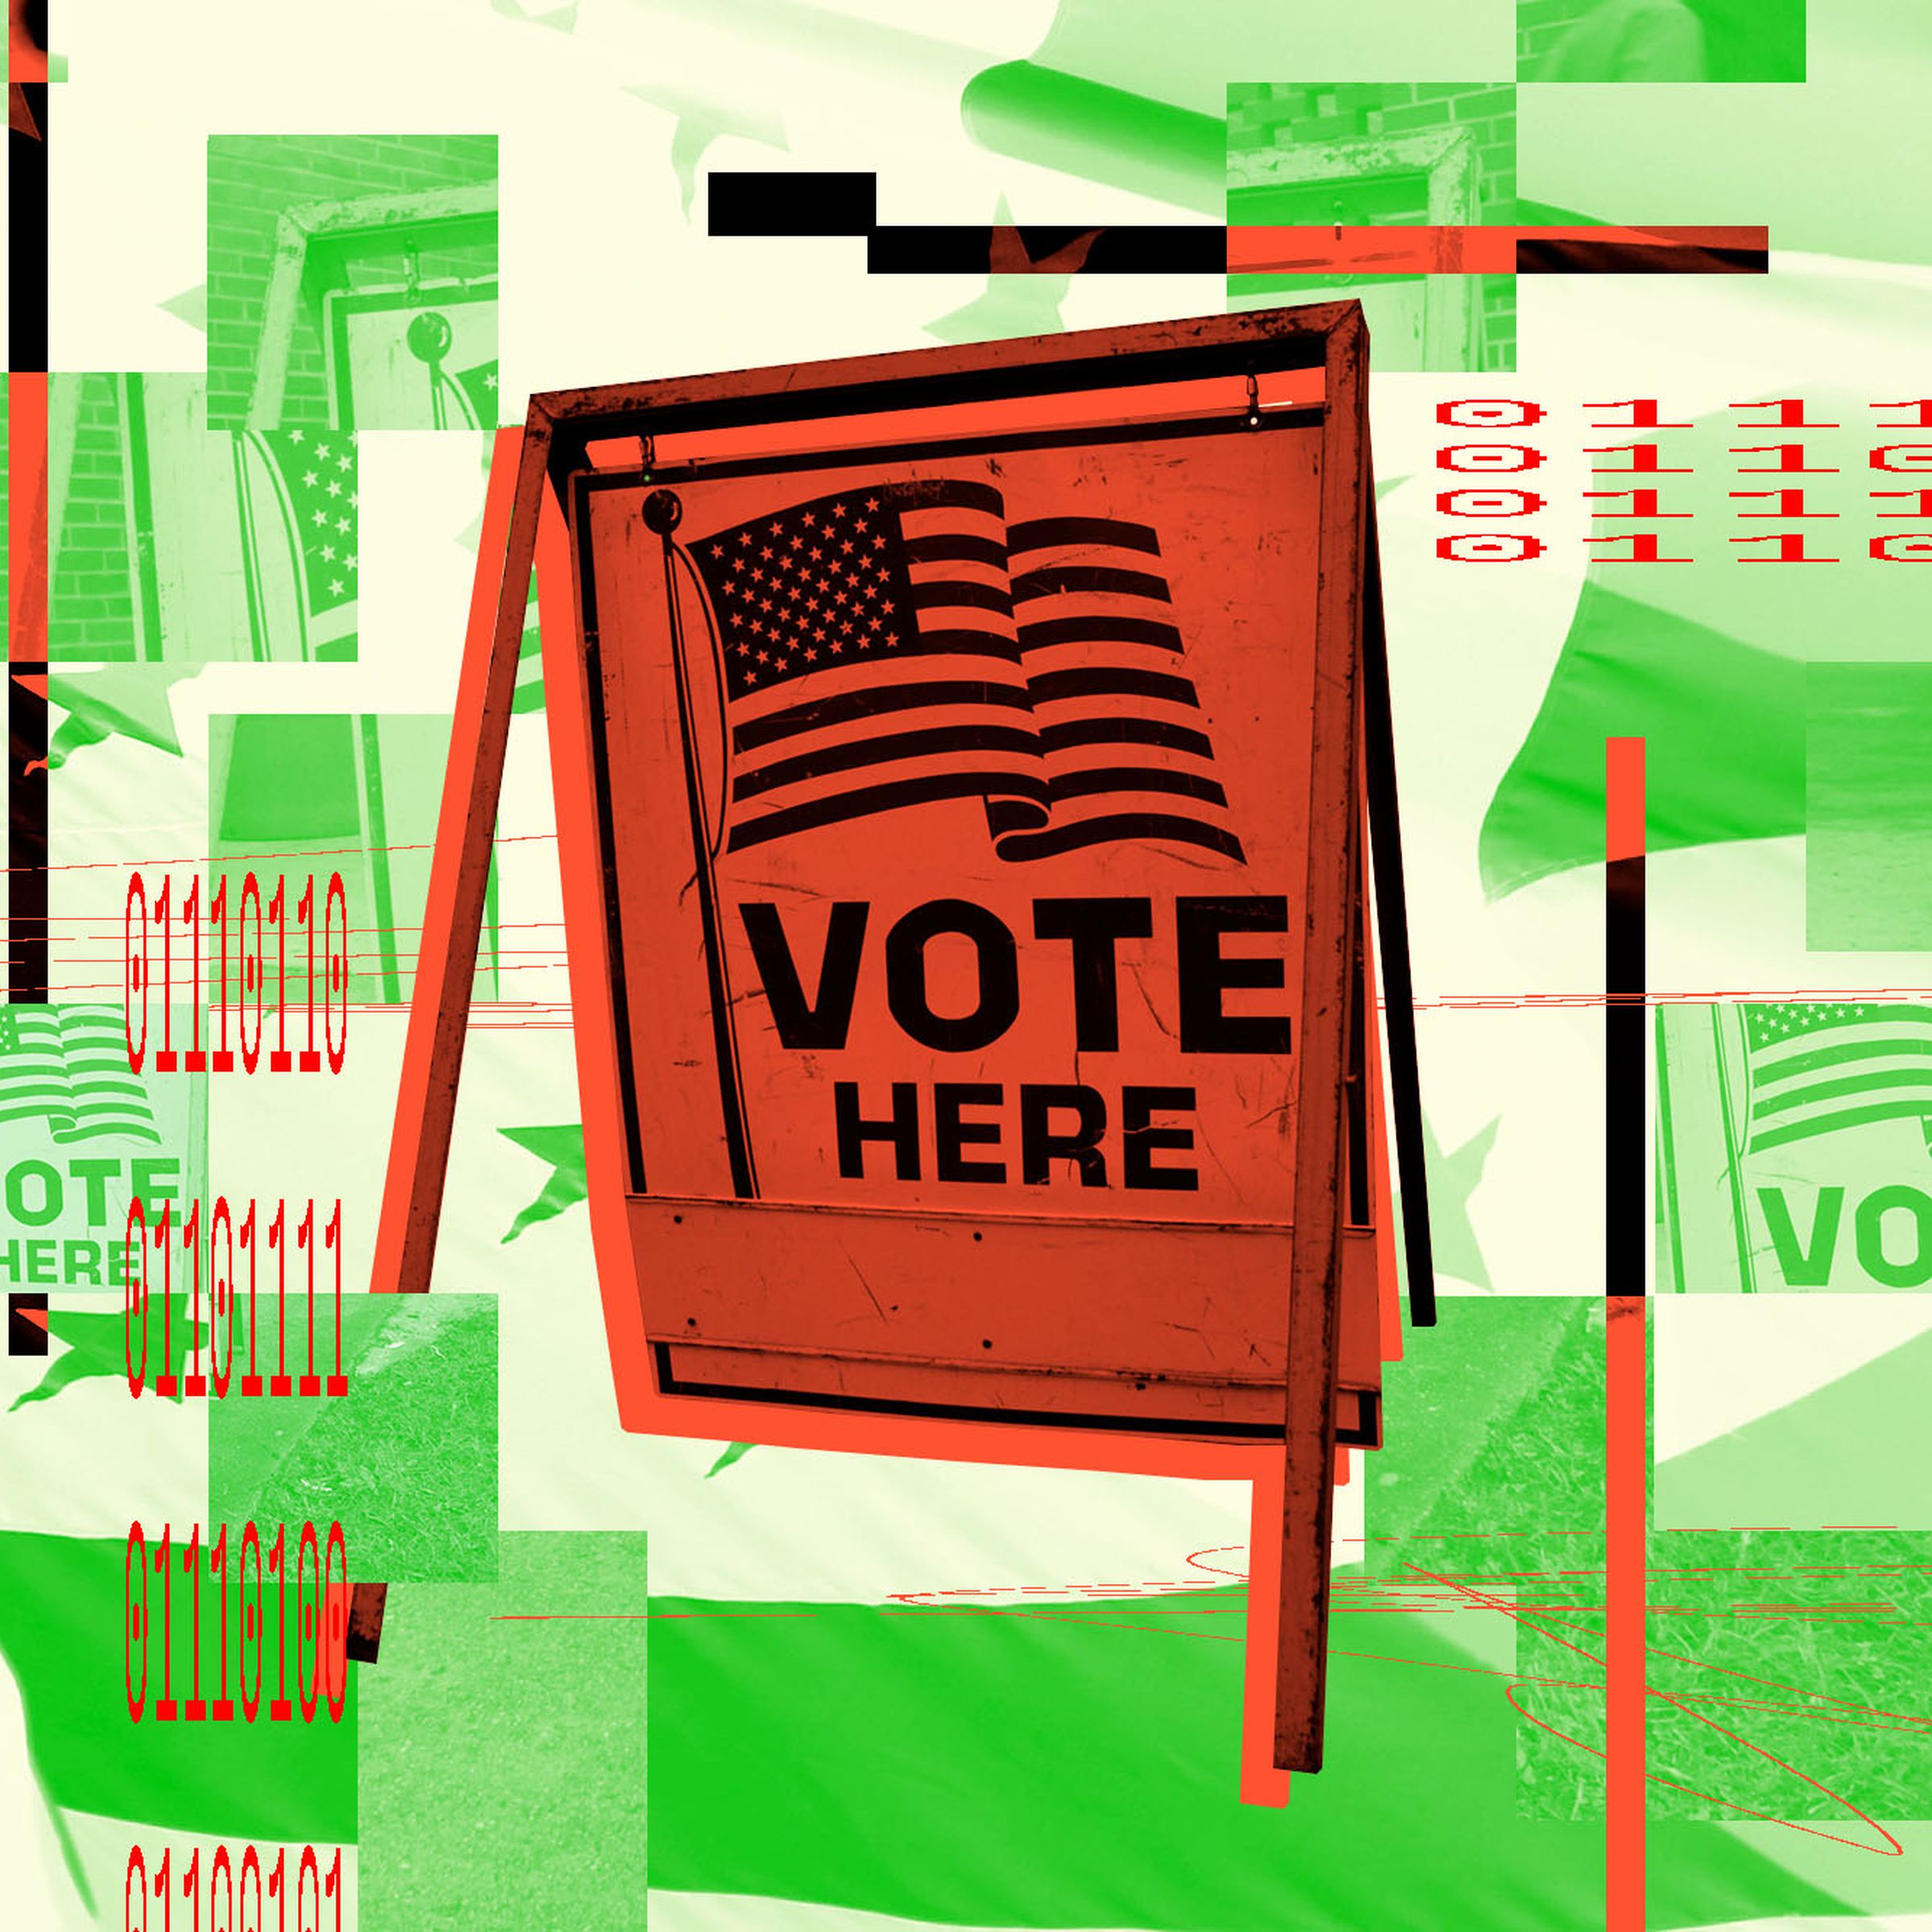 Graphic photo illustration of a voting sign that reads “Vote here”.